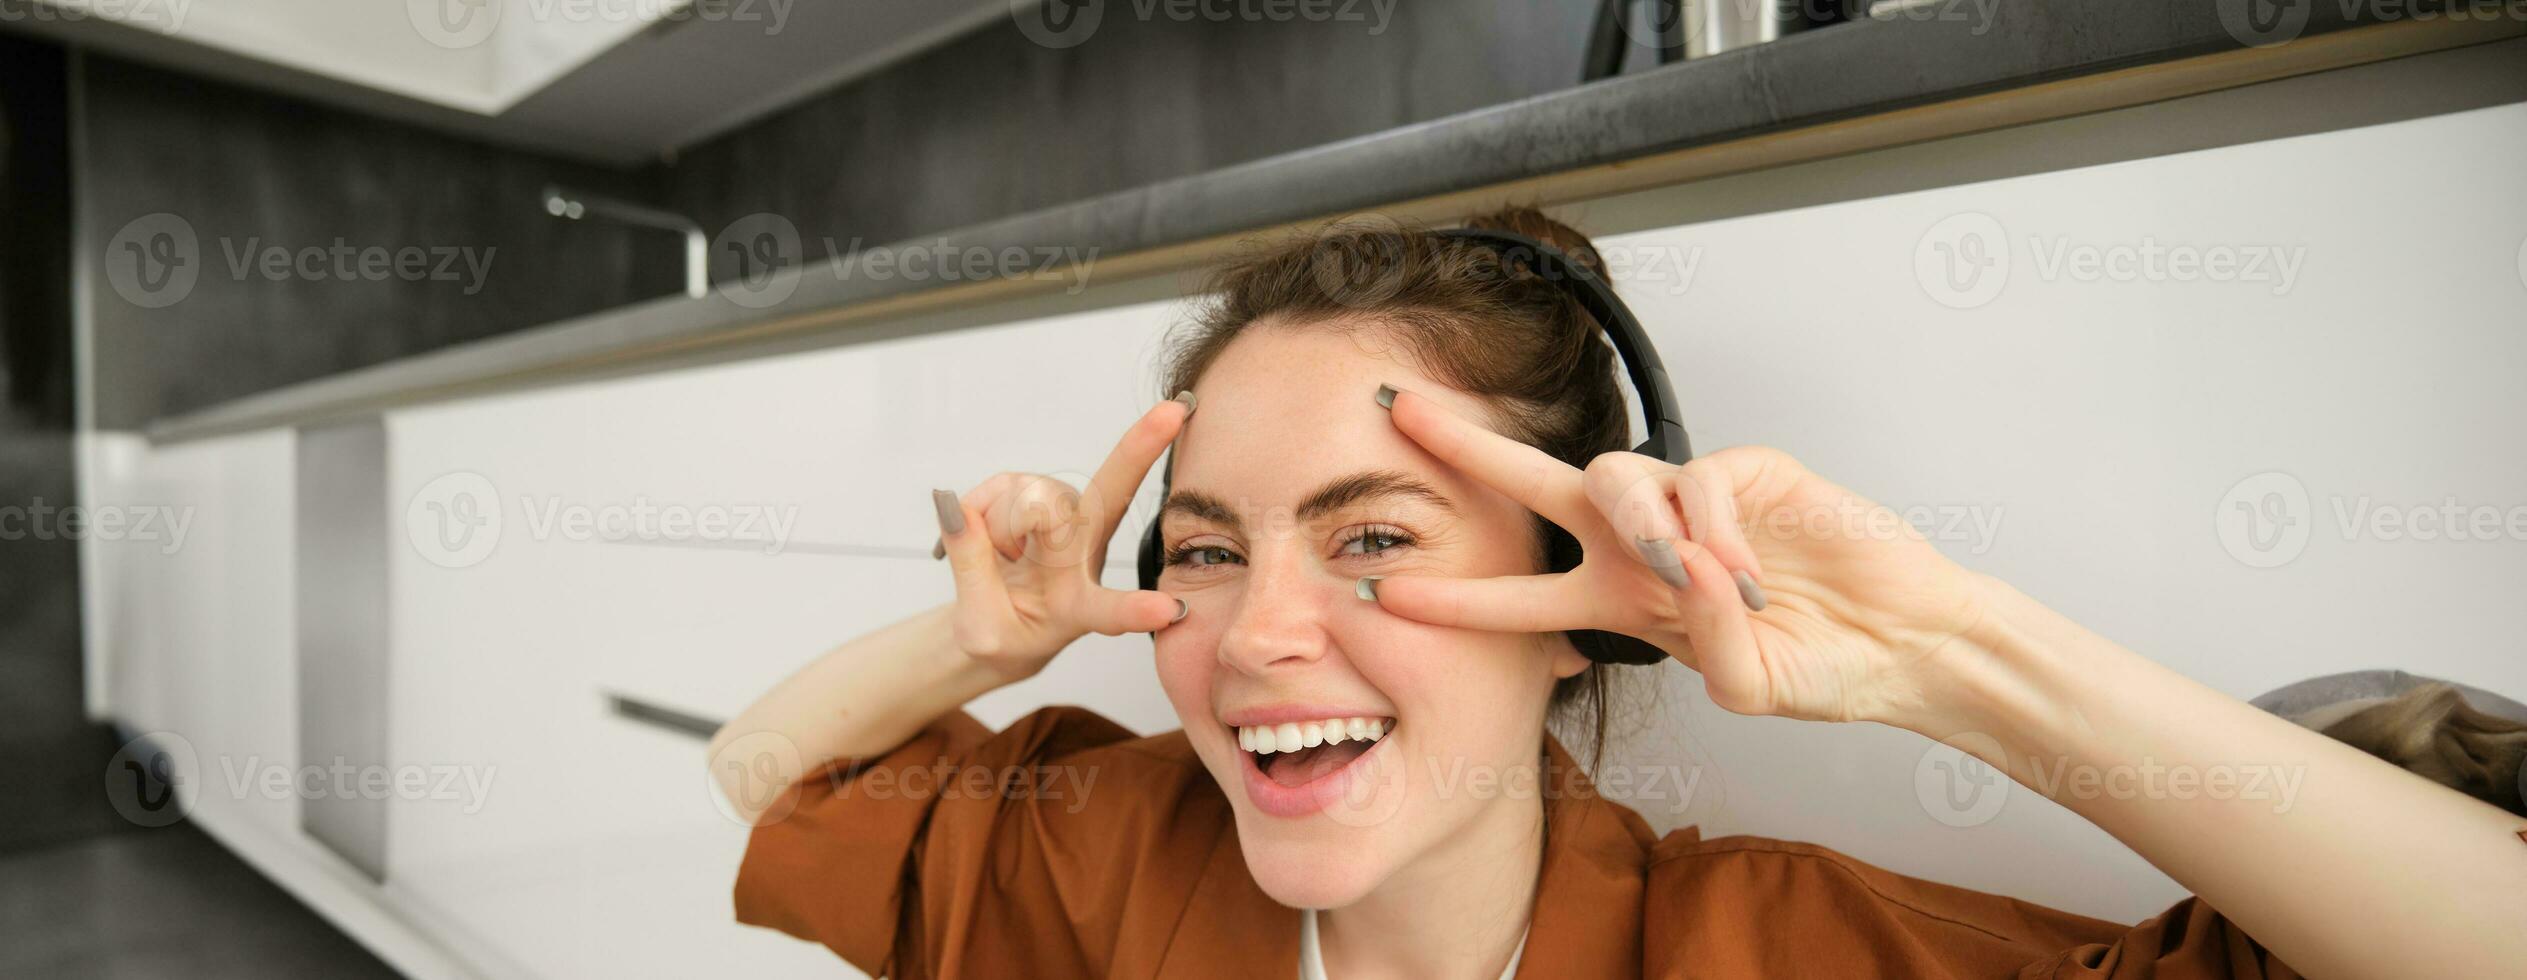 Close up of carefree young woman, laughing and smiling, showing peace, v-sign gesture, listening to music in wireless headphones photo